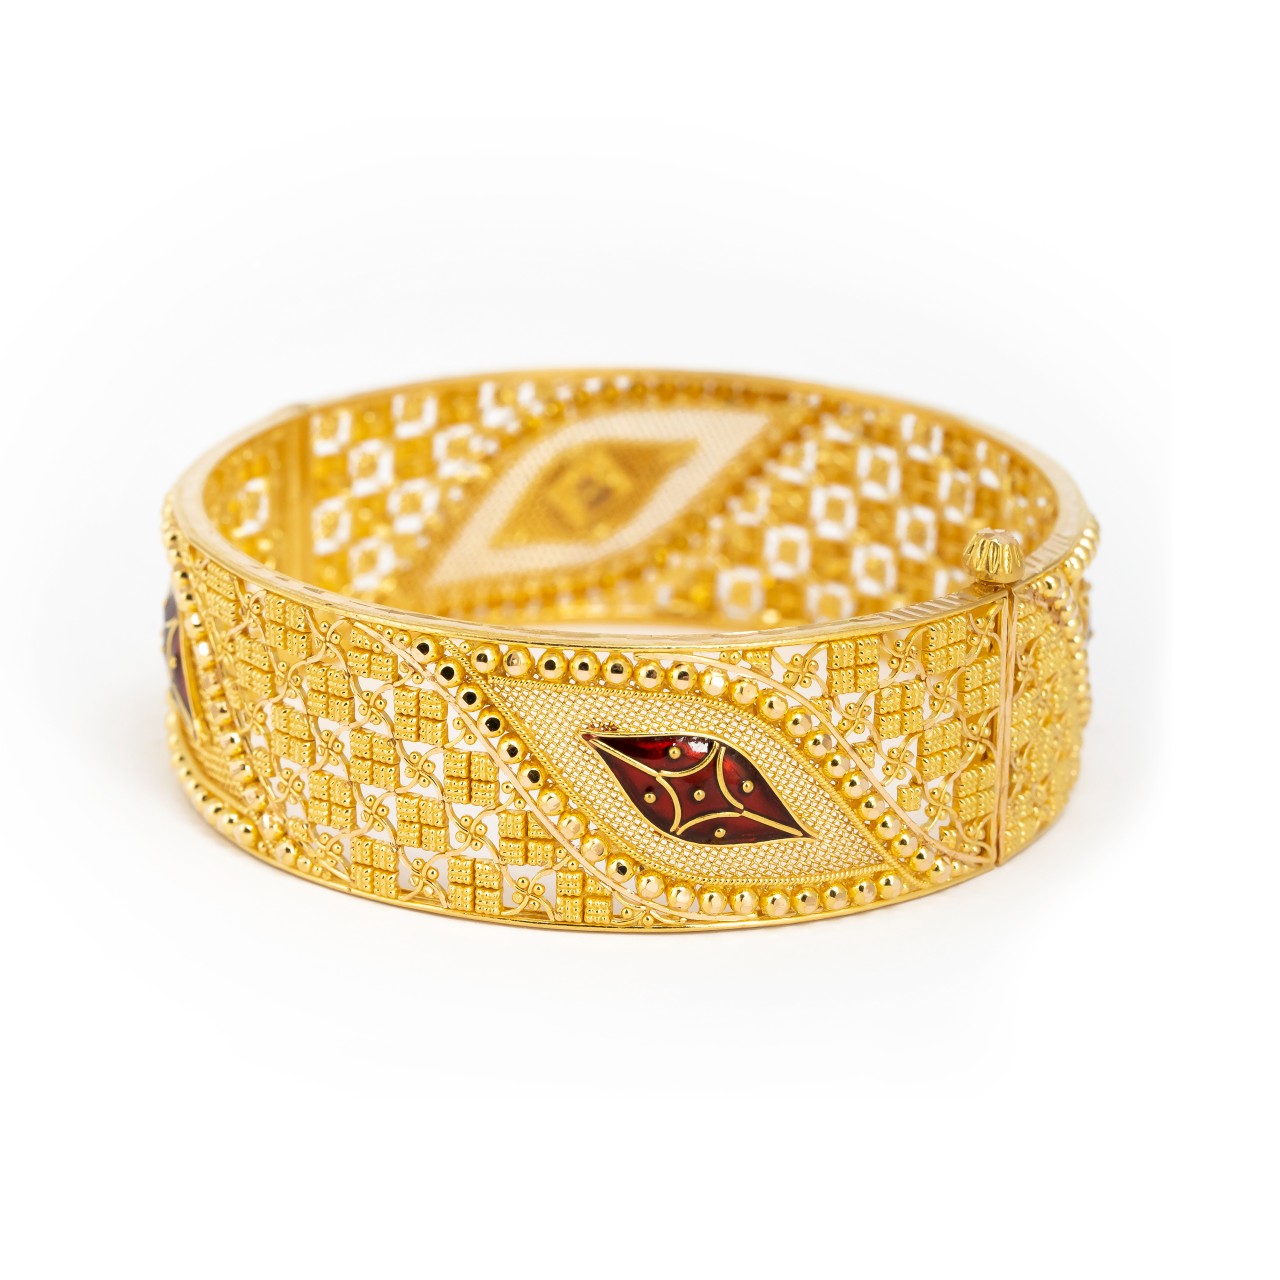 Uniquely Crafted Gold Bracelets For Any Occasion